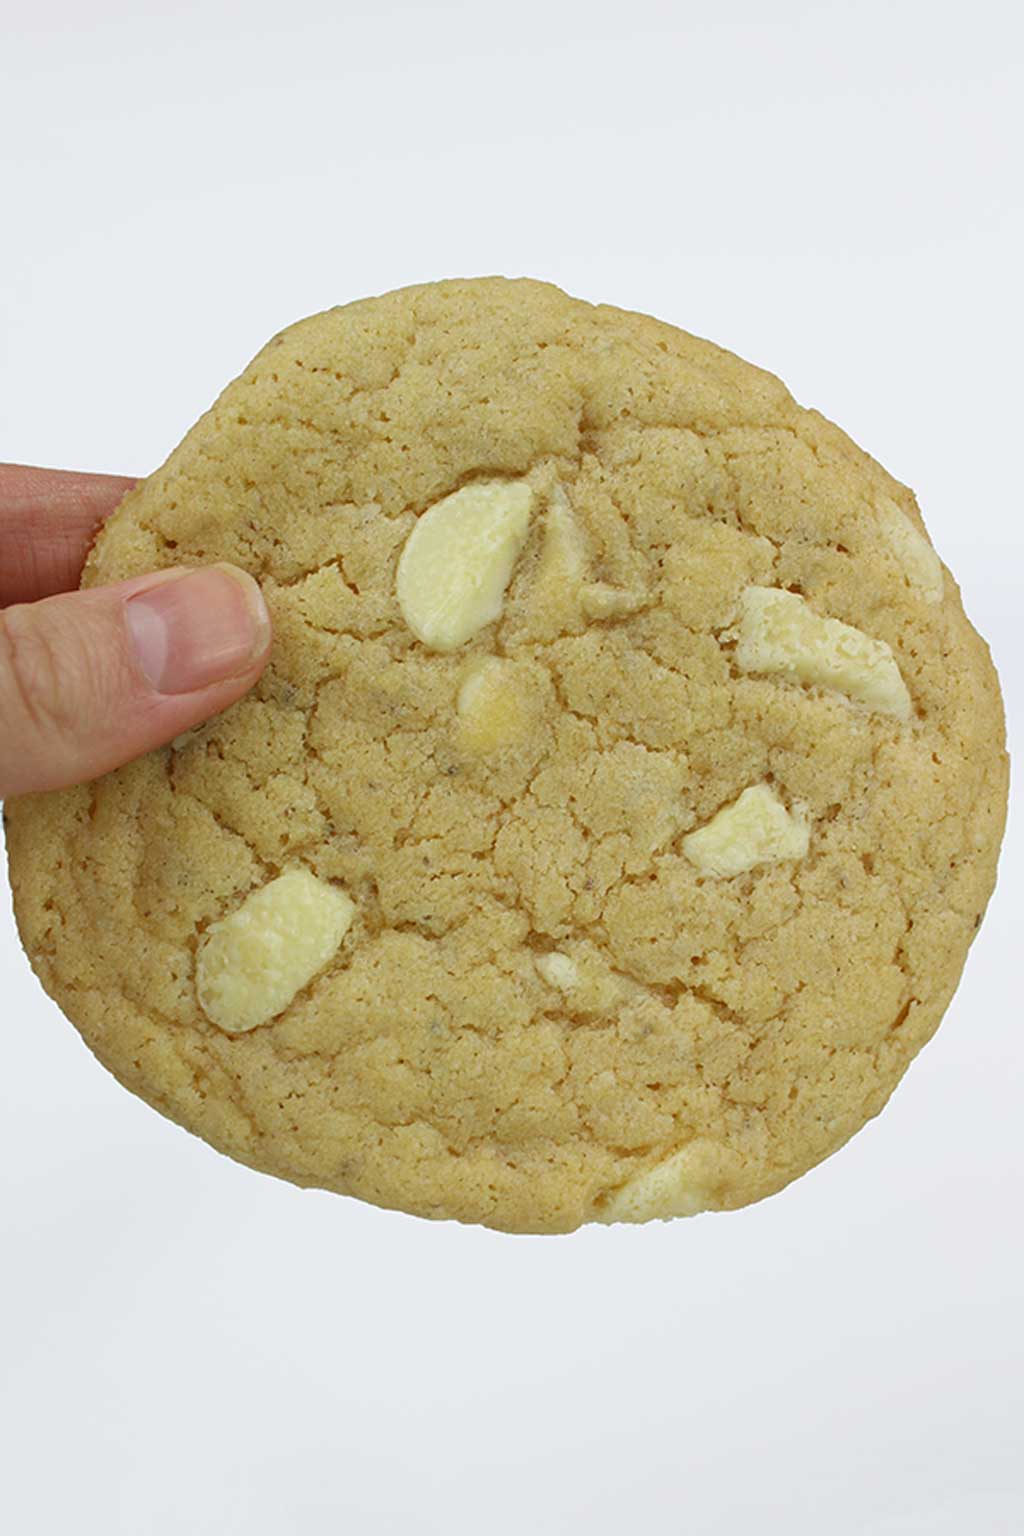 a hand holding up 1 large white chocolate chip cookie